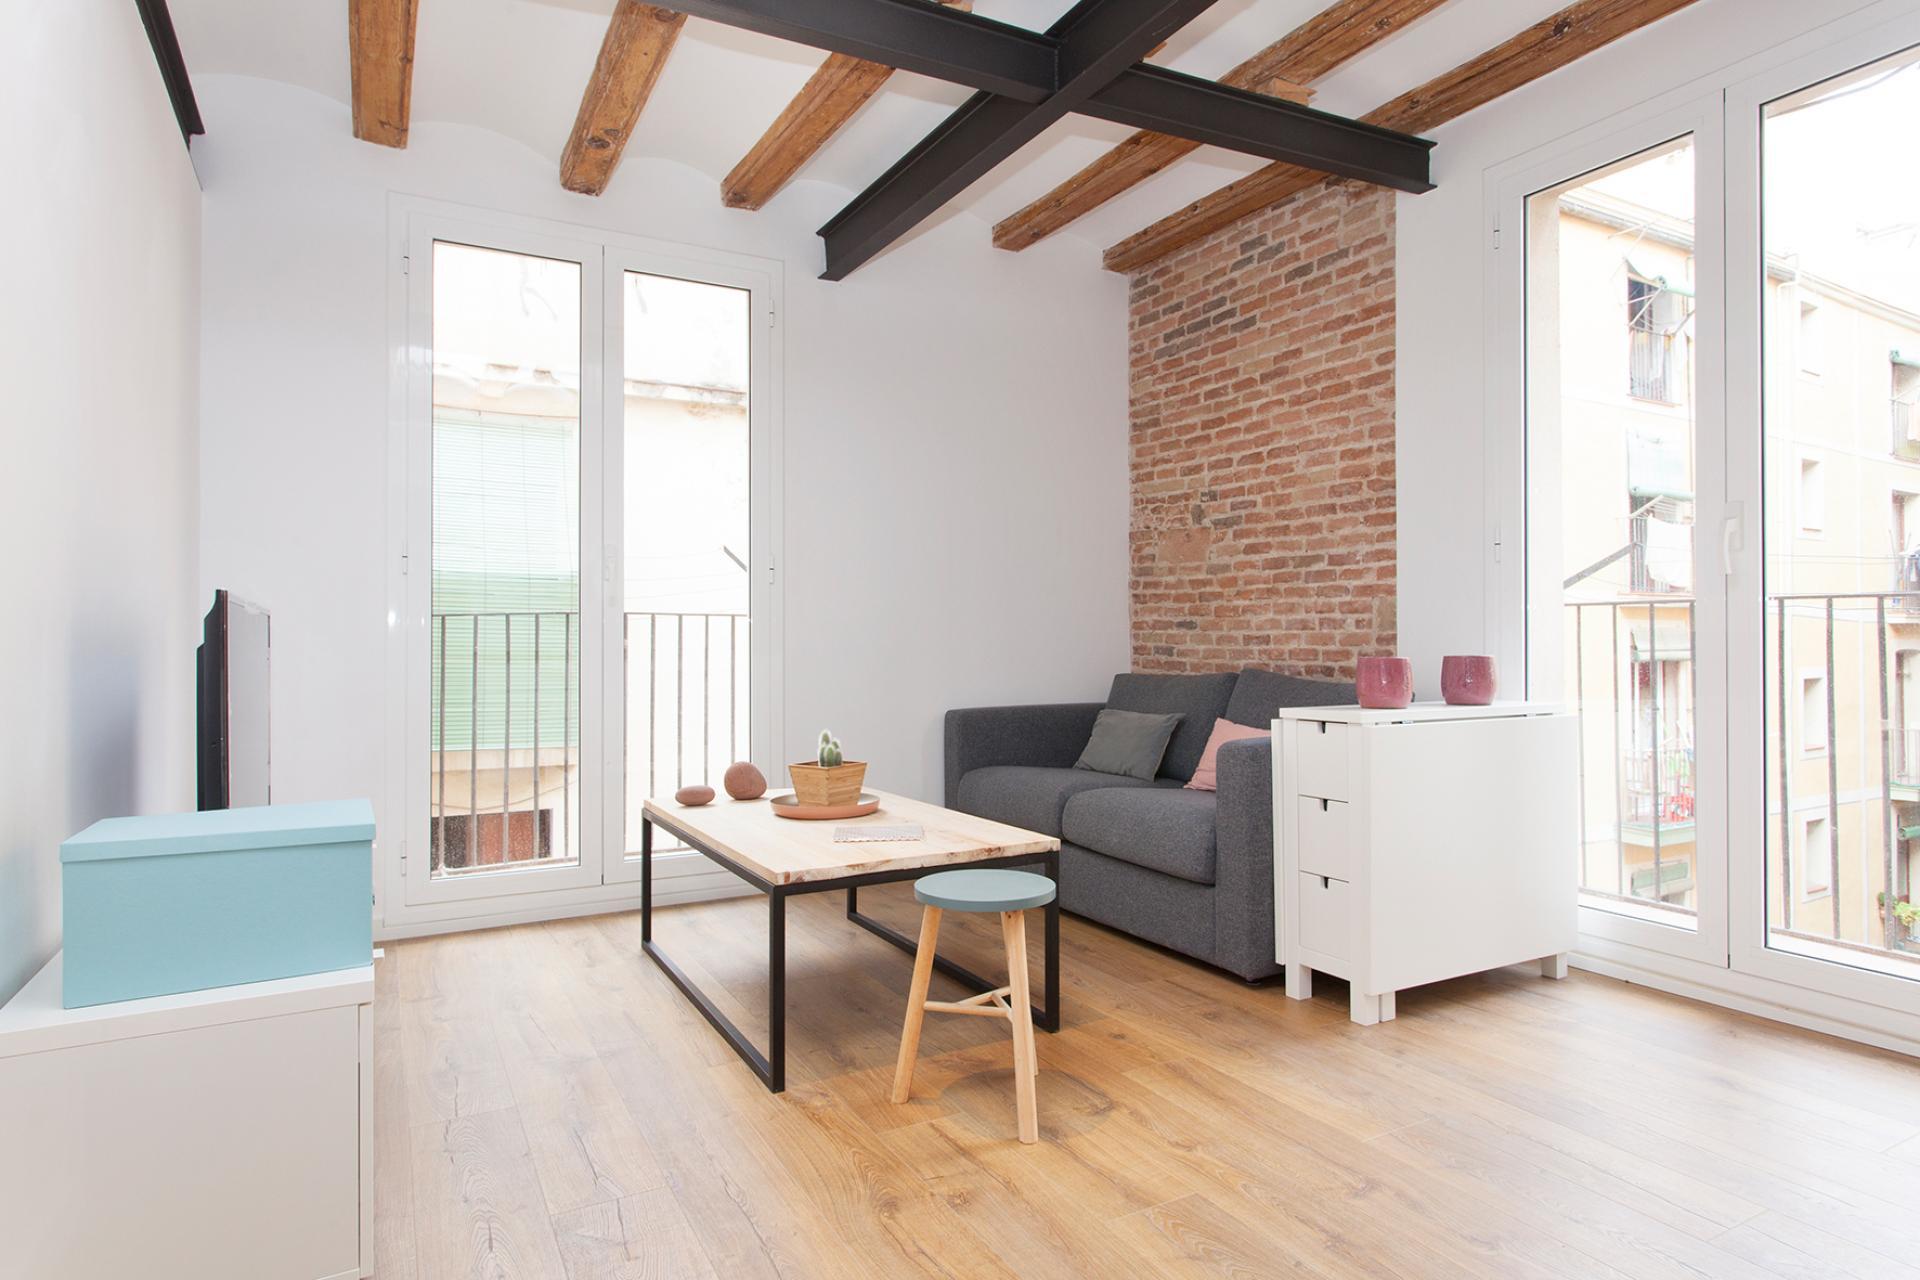 Apartment for rent in Raval, Barcelona. Apartments for rent in the c - 1